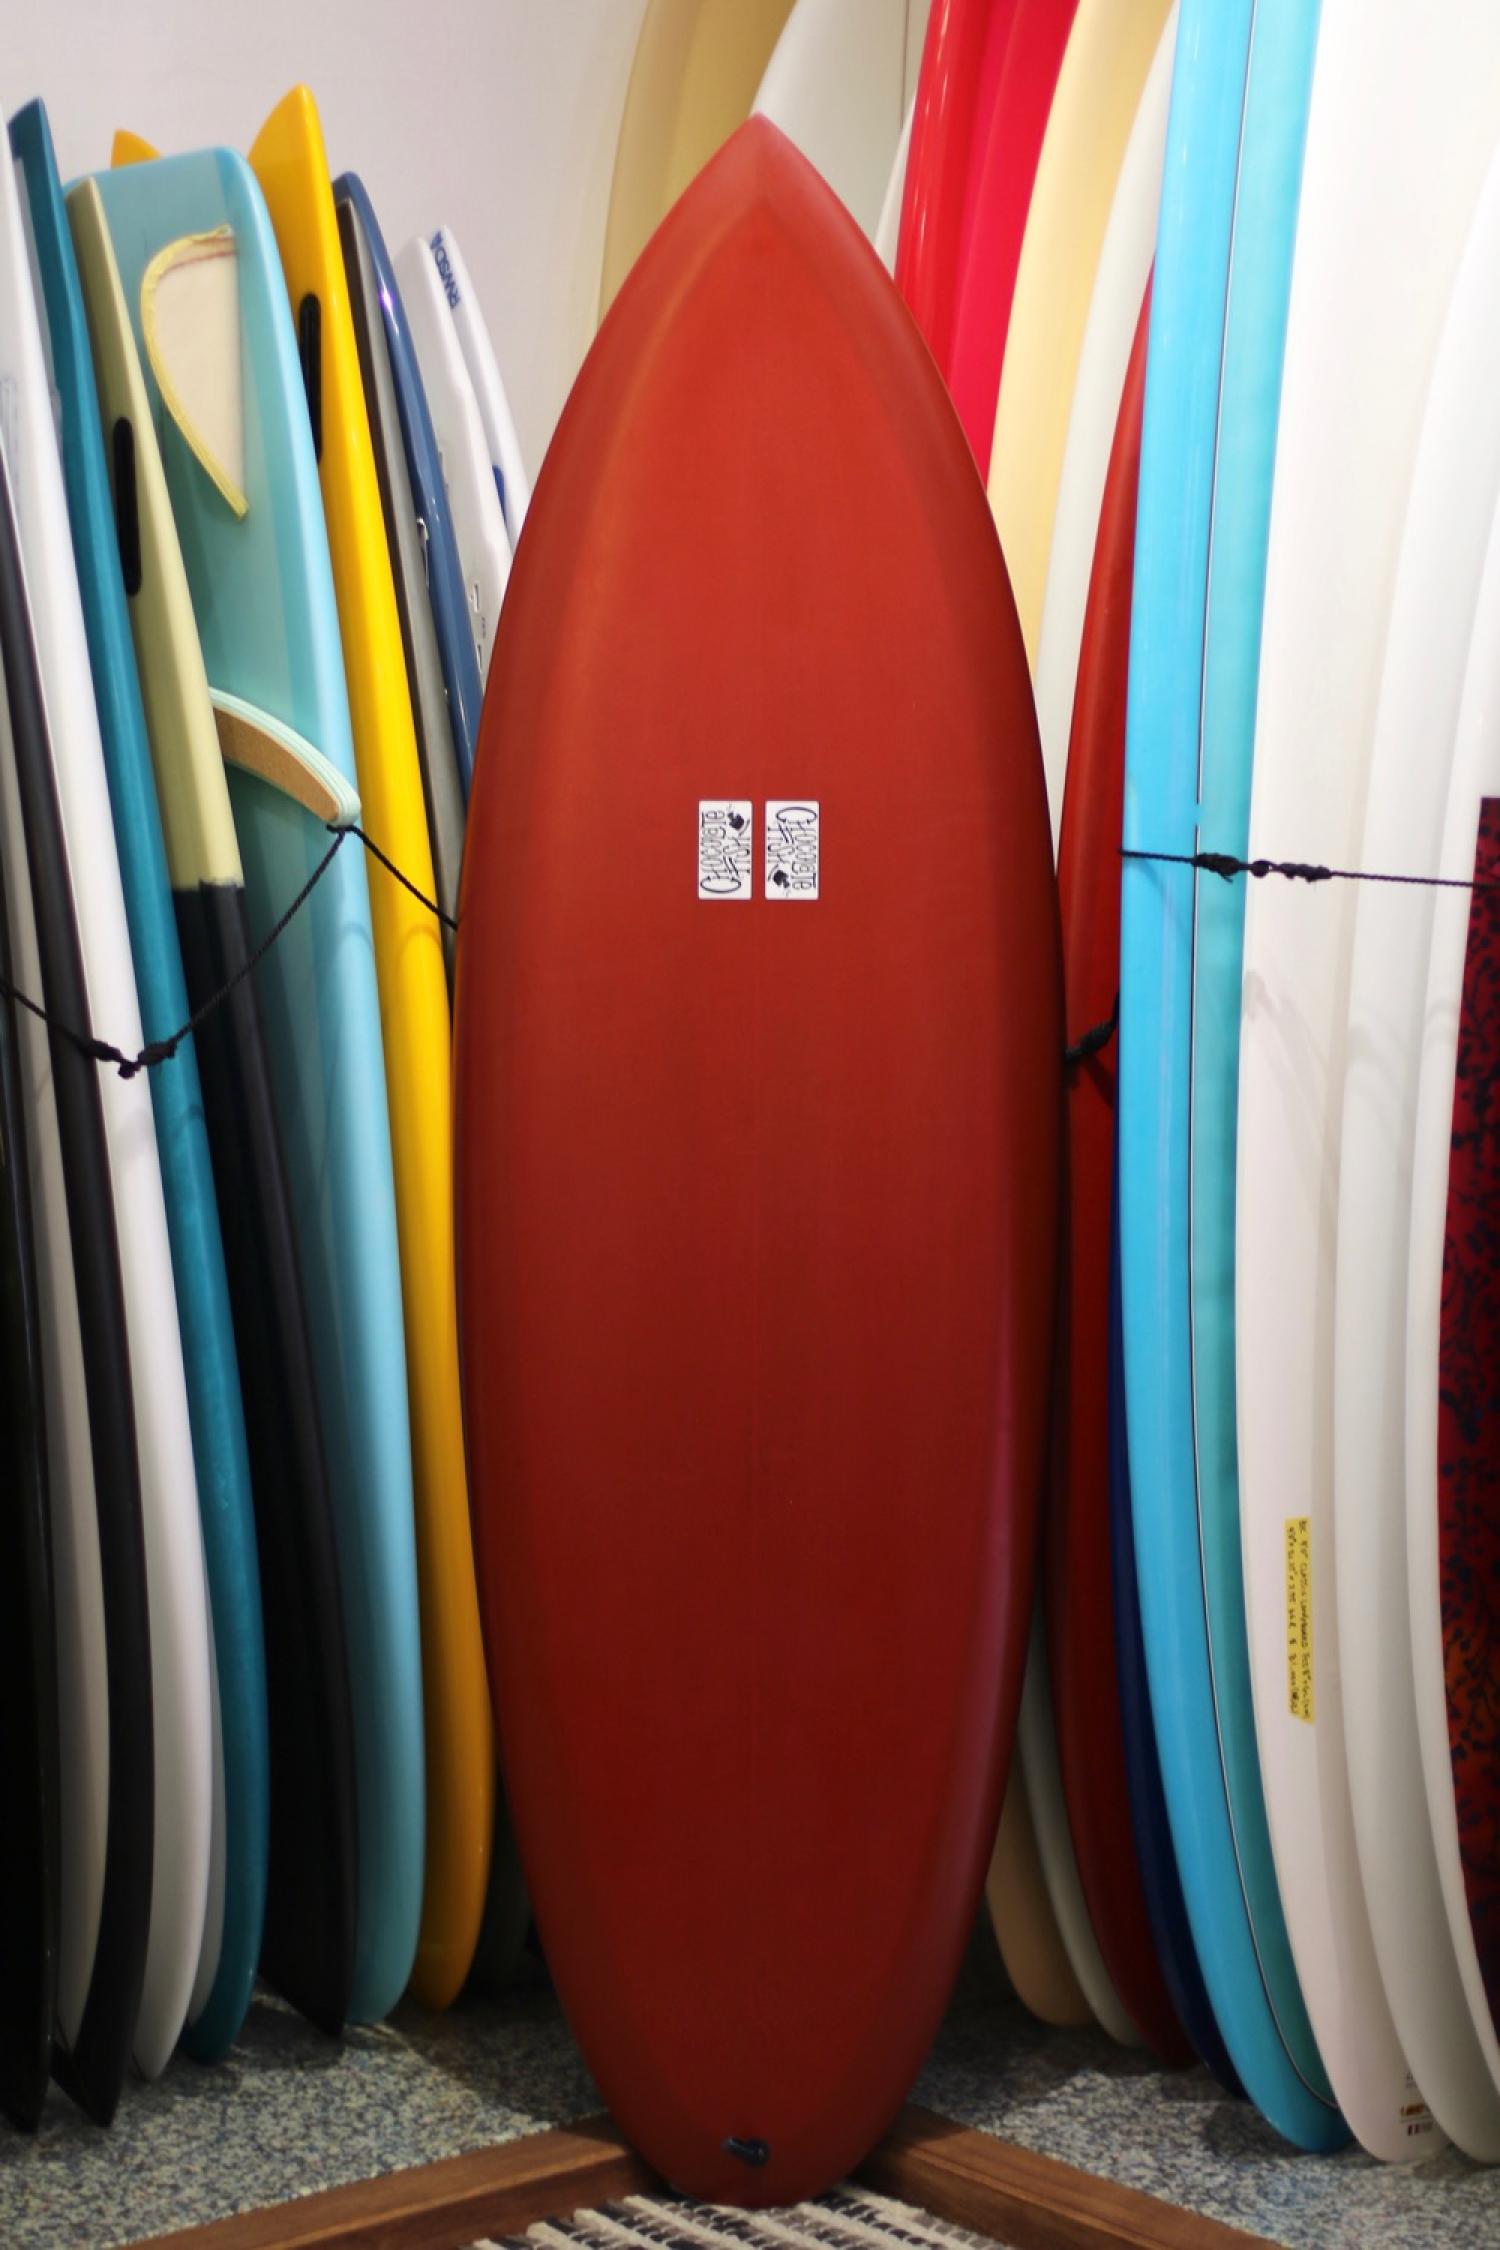 USED BOARDS (Chocolate Fish Surfboards Cosmic Fonder 5.10)